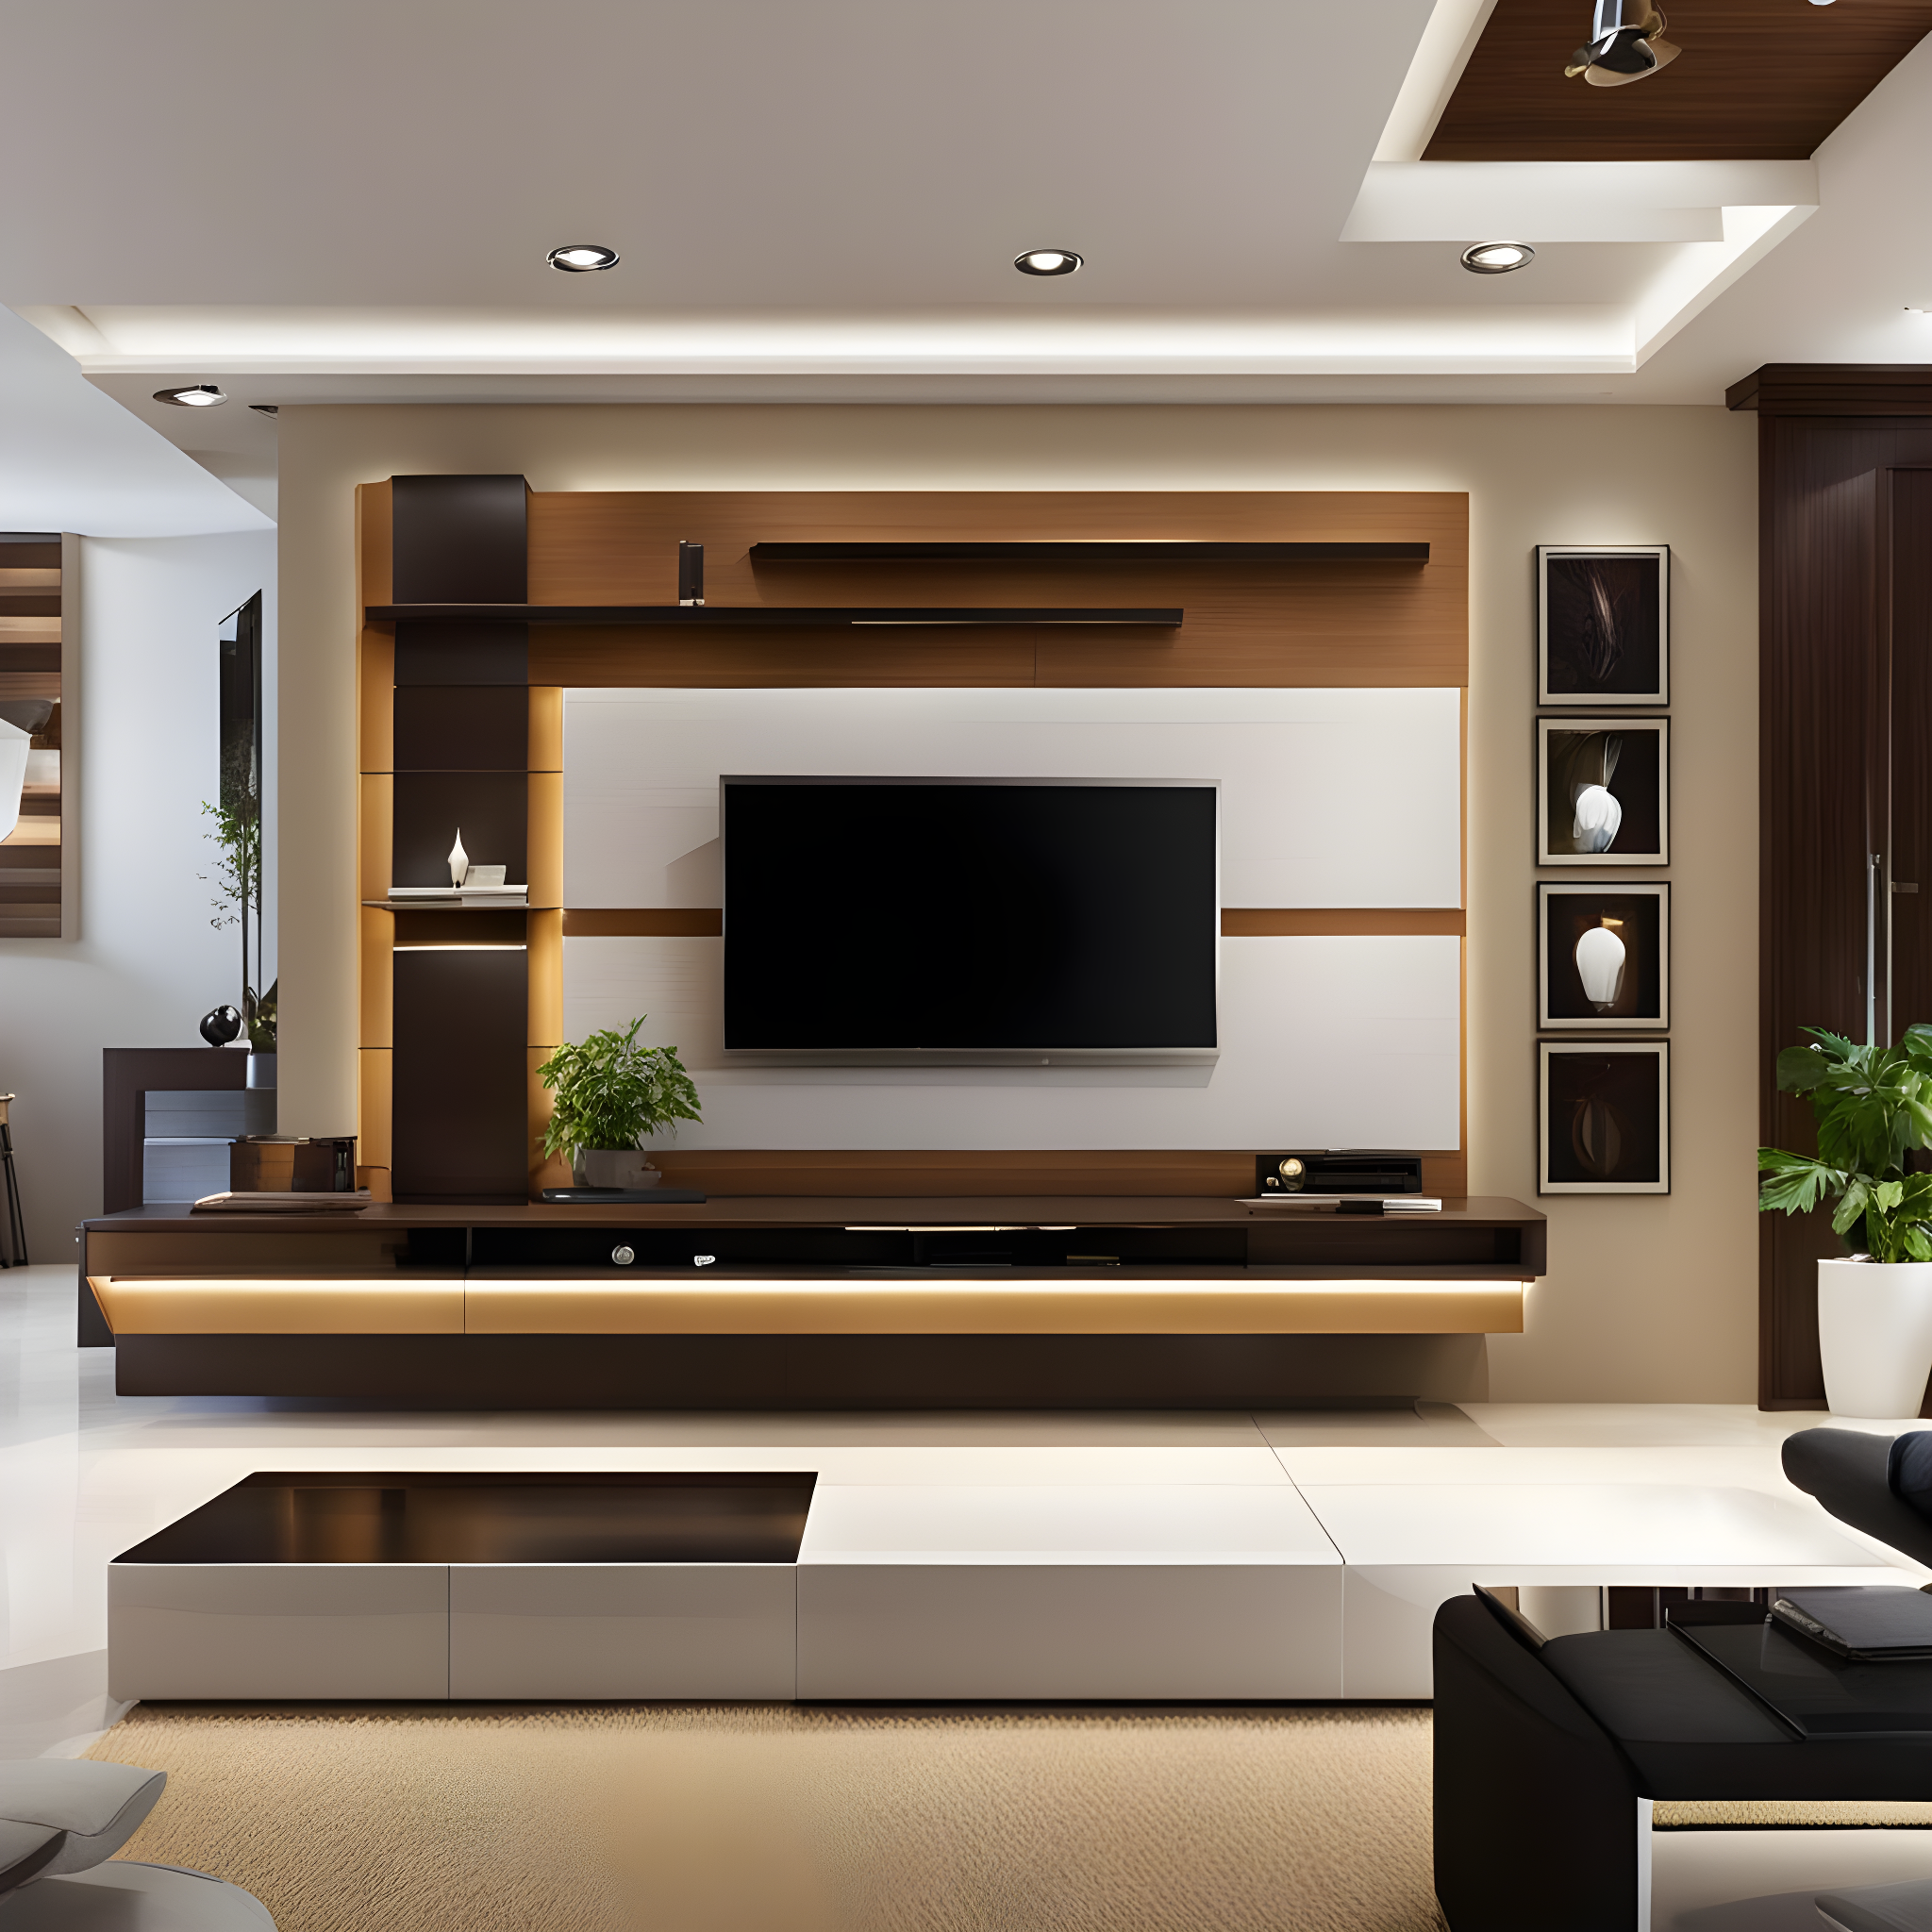 EST INTERIOR DESIGNERS IN REVIEWS WHITEFIELD, BANGALORE